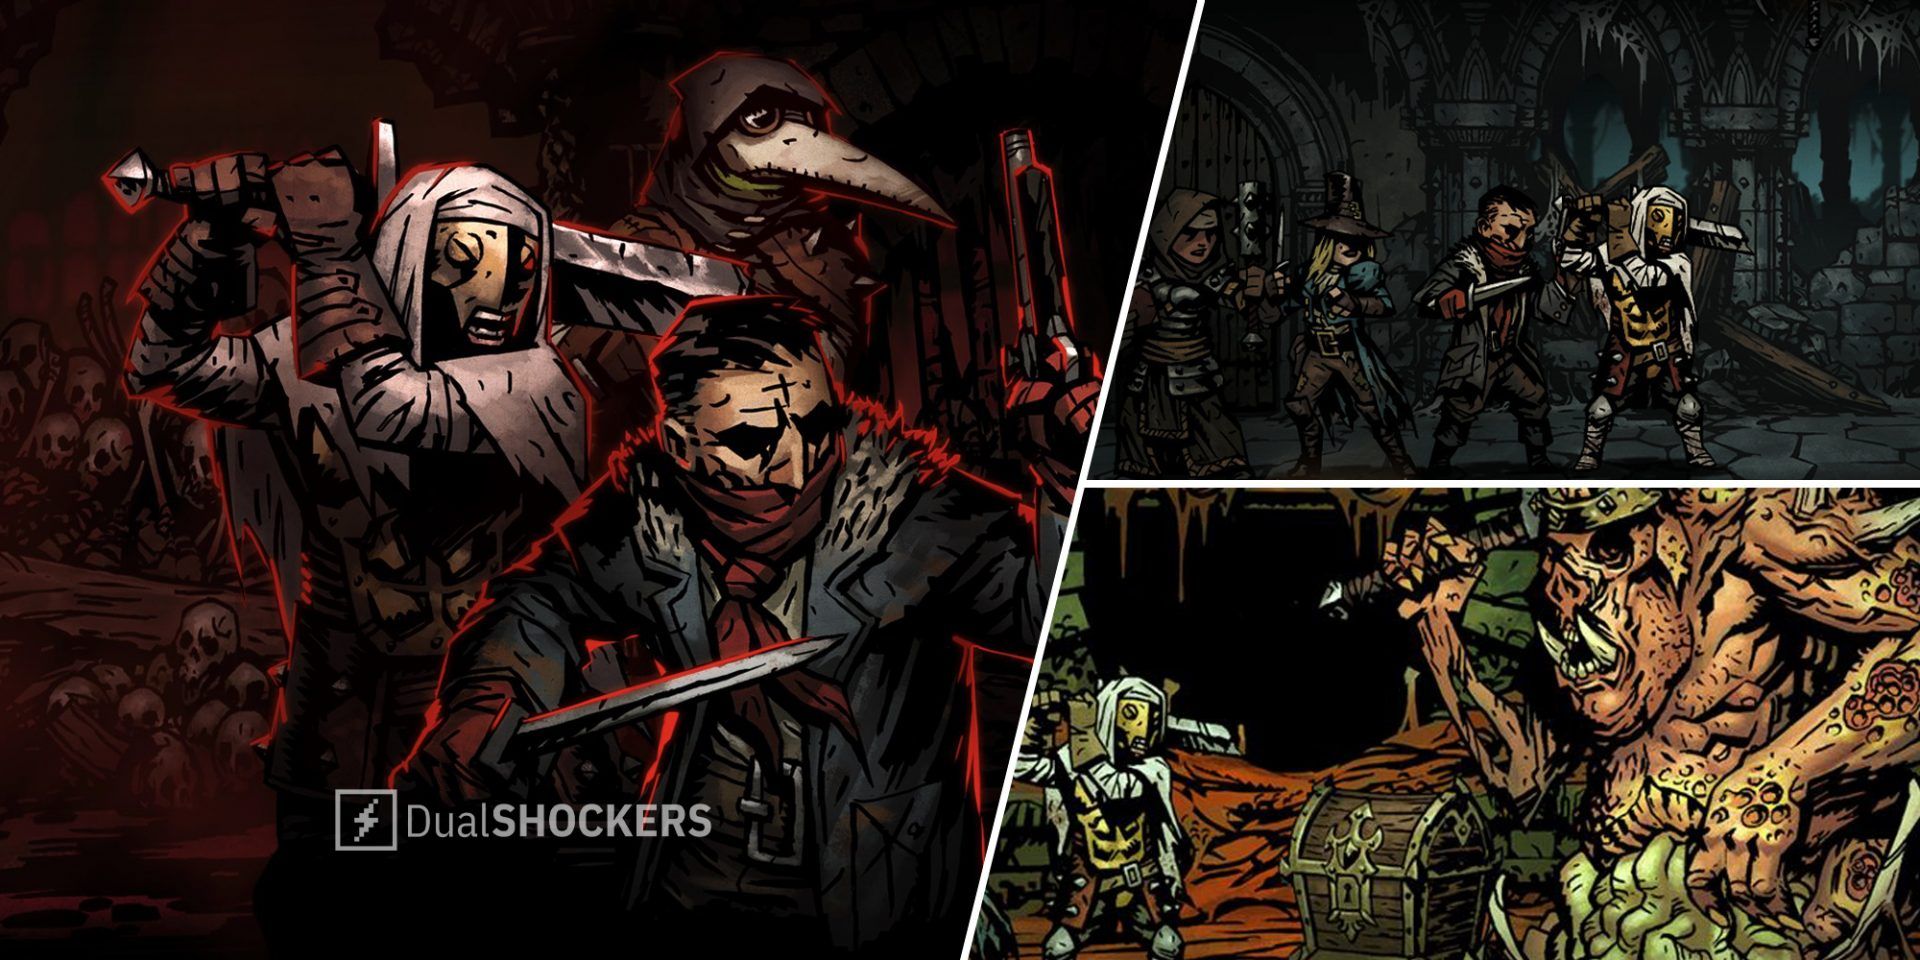 Darkest Dungeon RPG game split image showing multiple characters from the game